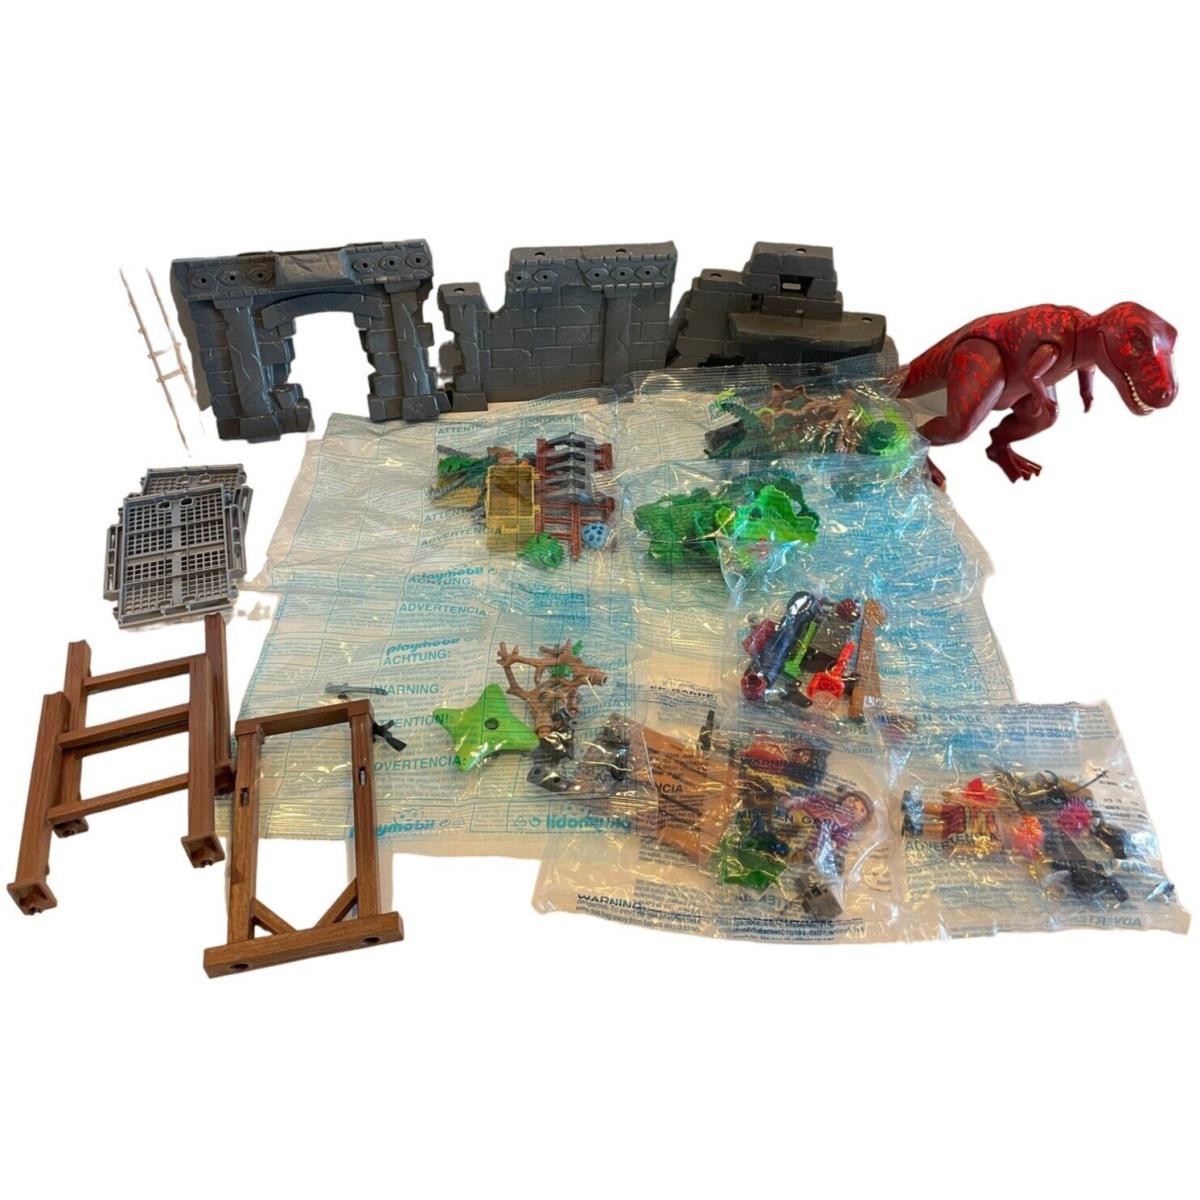 Playmobil Hidden Temple with T-rex The Explorers Set 9429 Complete- No Box